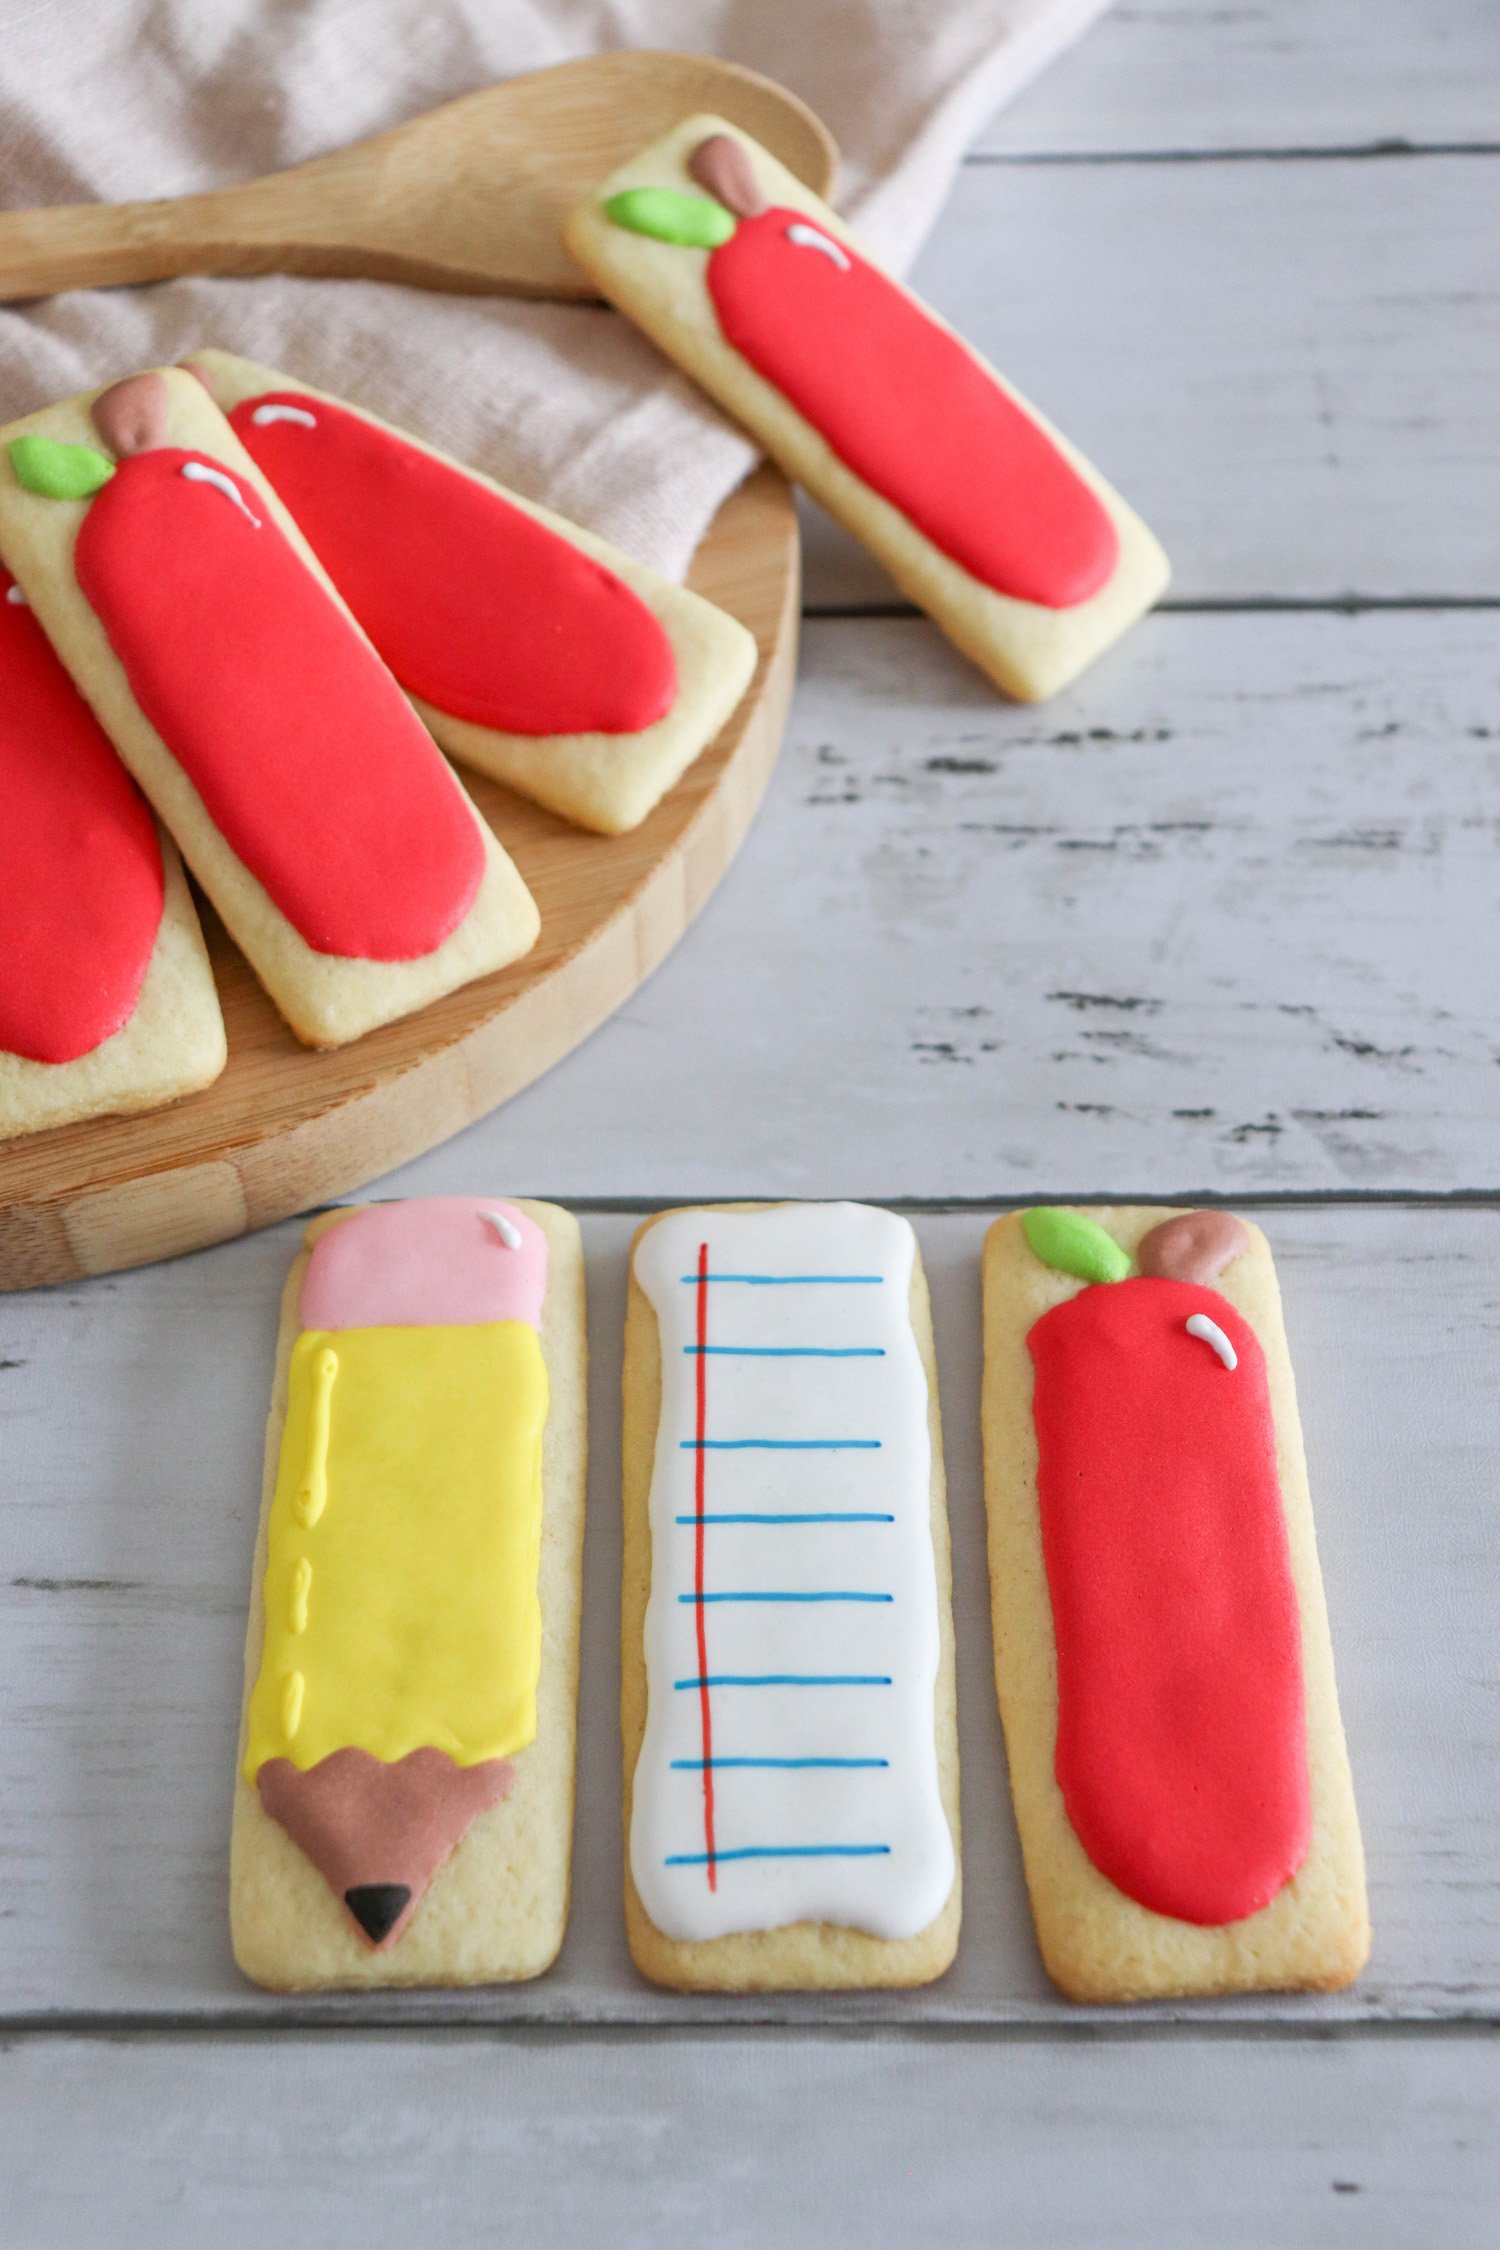 pencil, apple, and lined notebook paper designs on sugar cookies